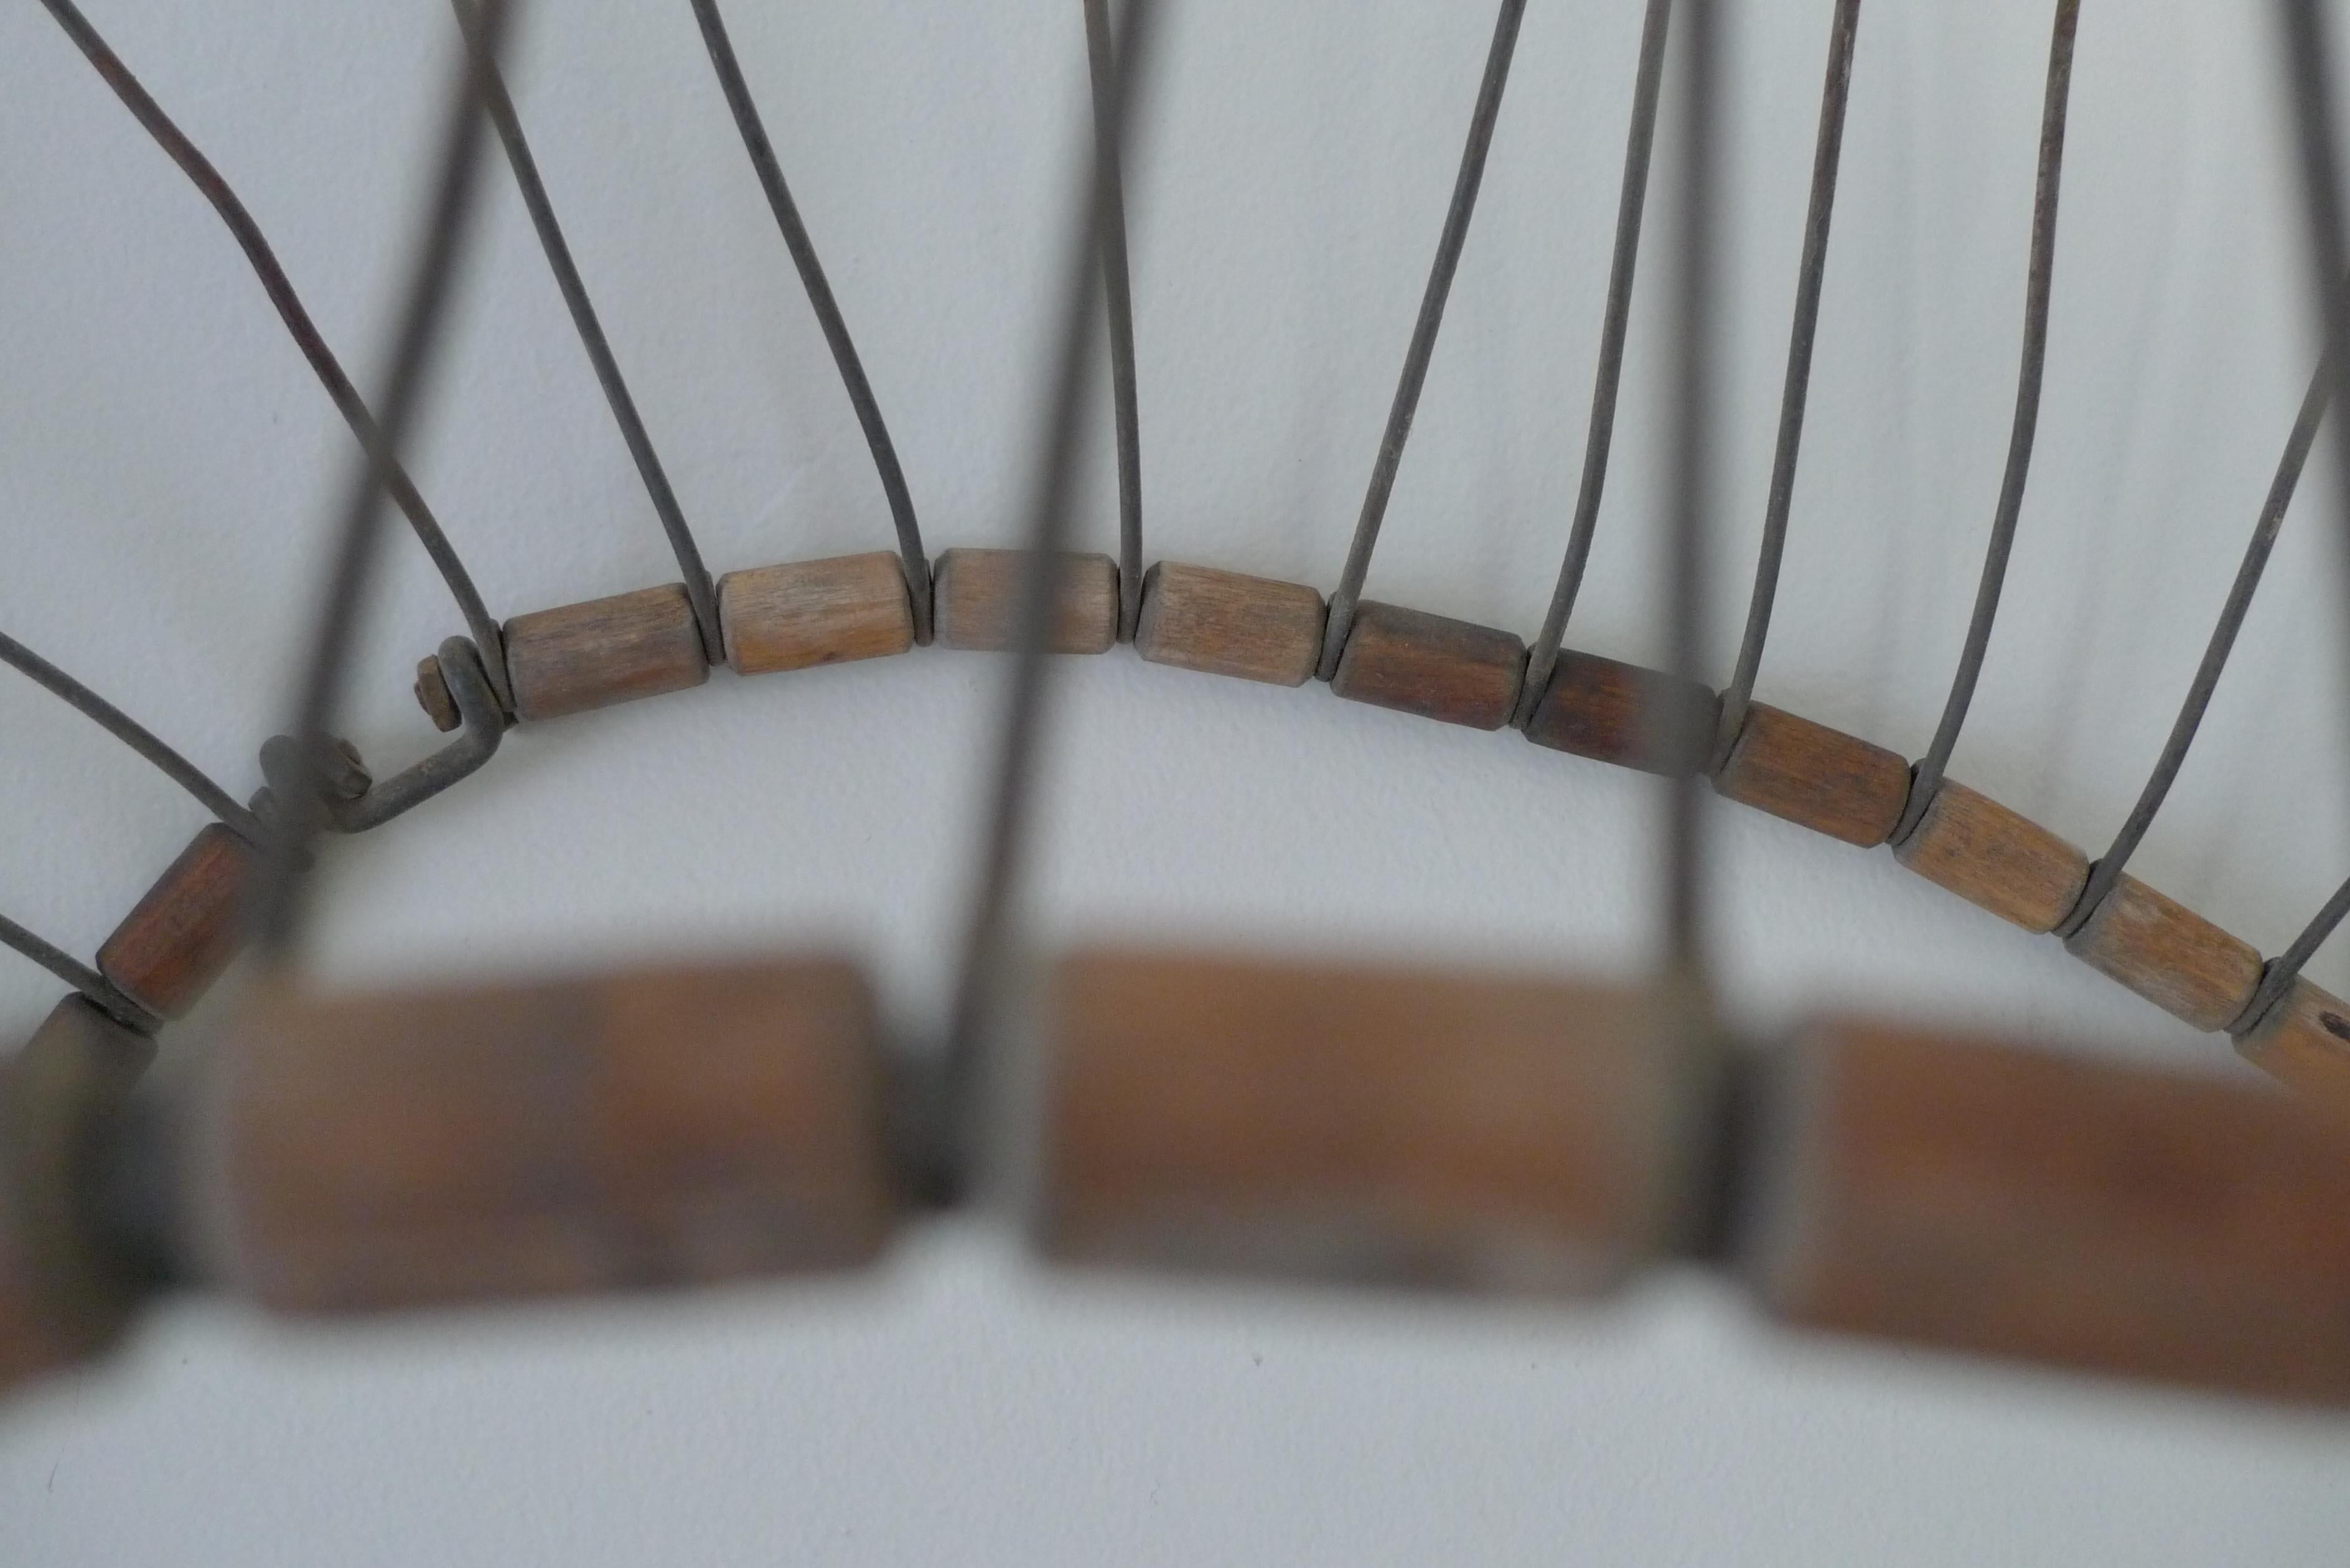 Steel Sculpture for wall; midcentury bead wire tire structure, pair; like an eel trap For Sale